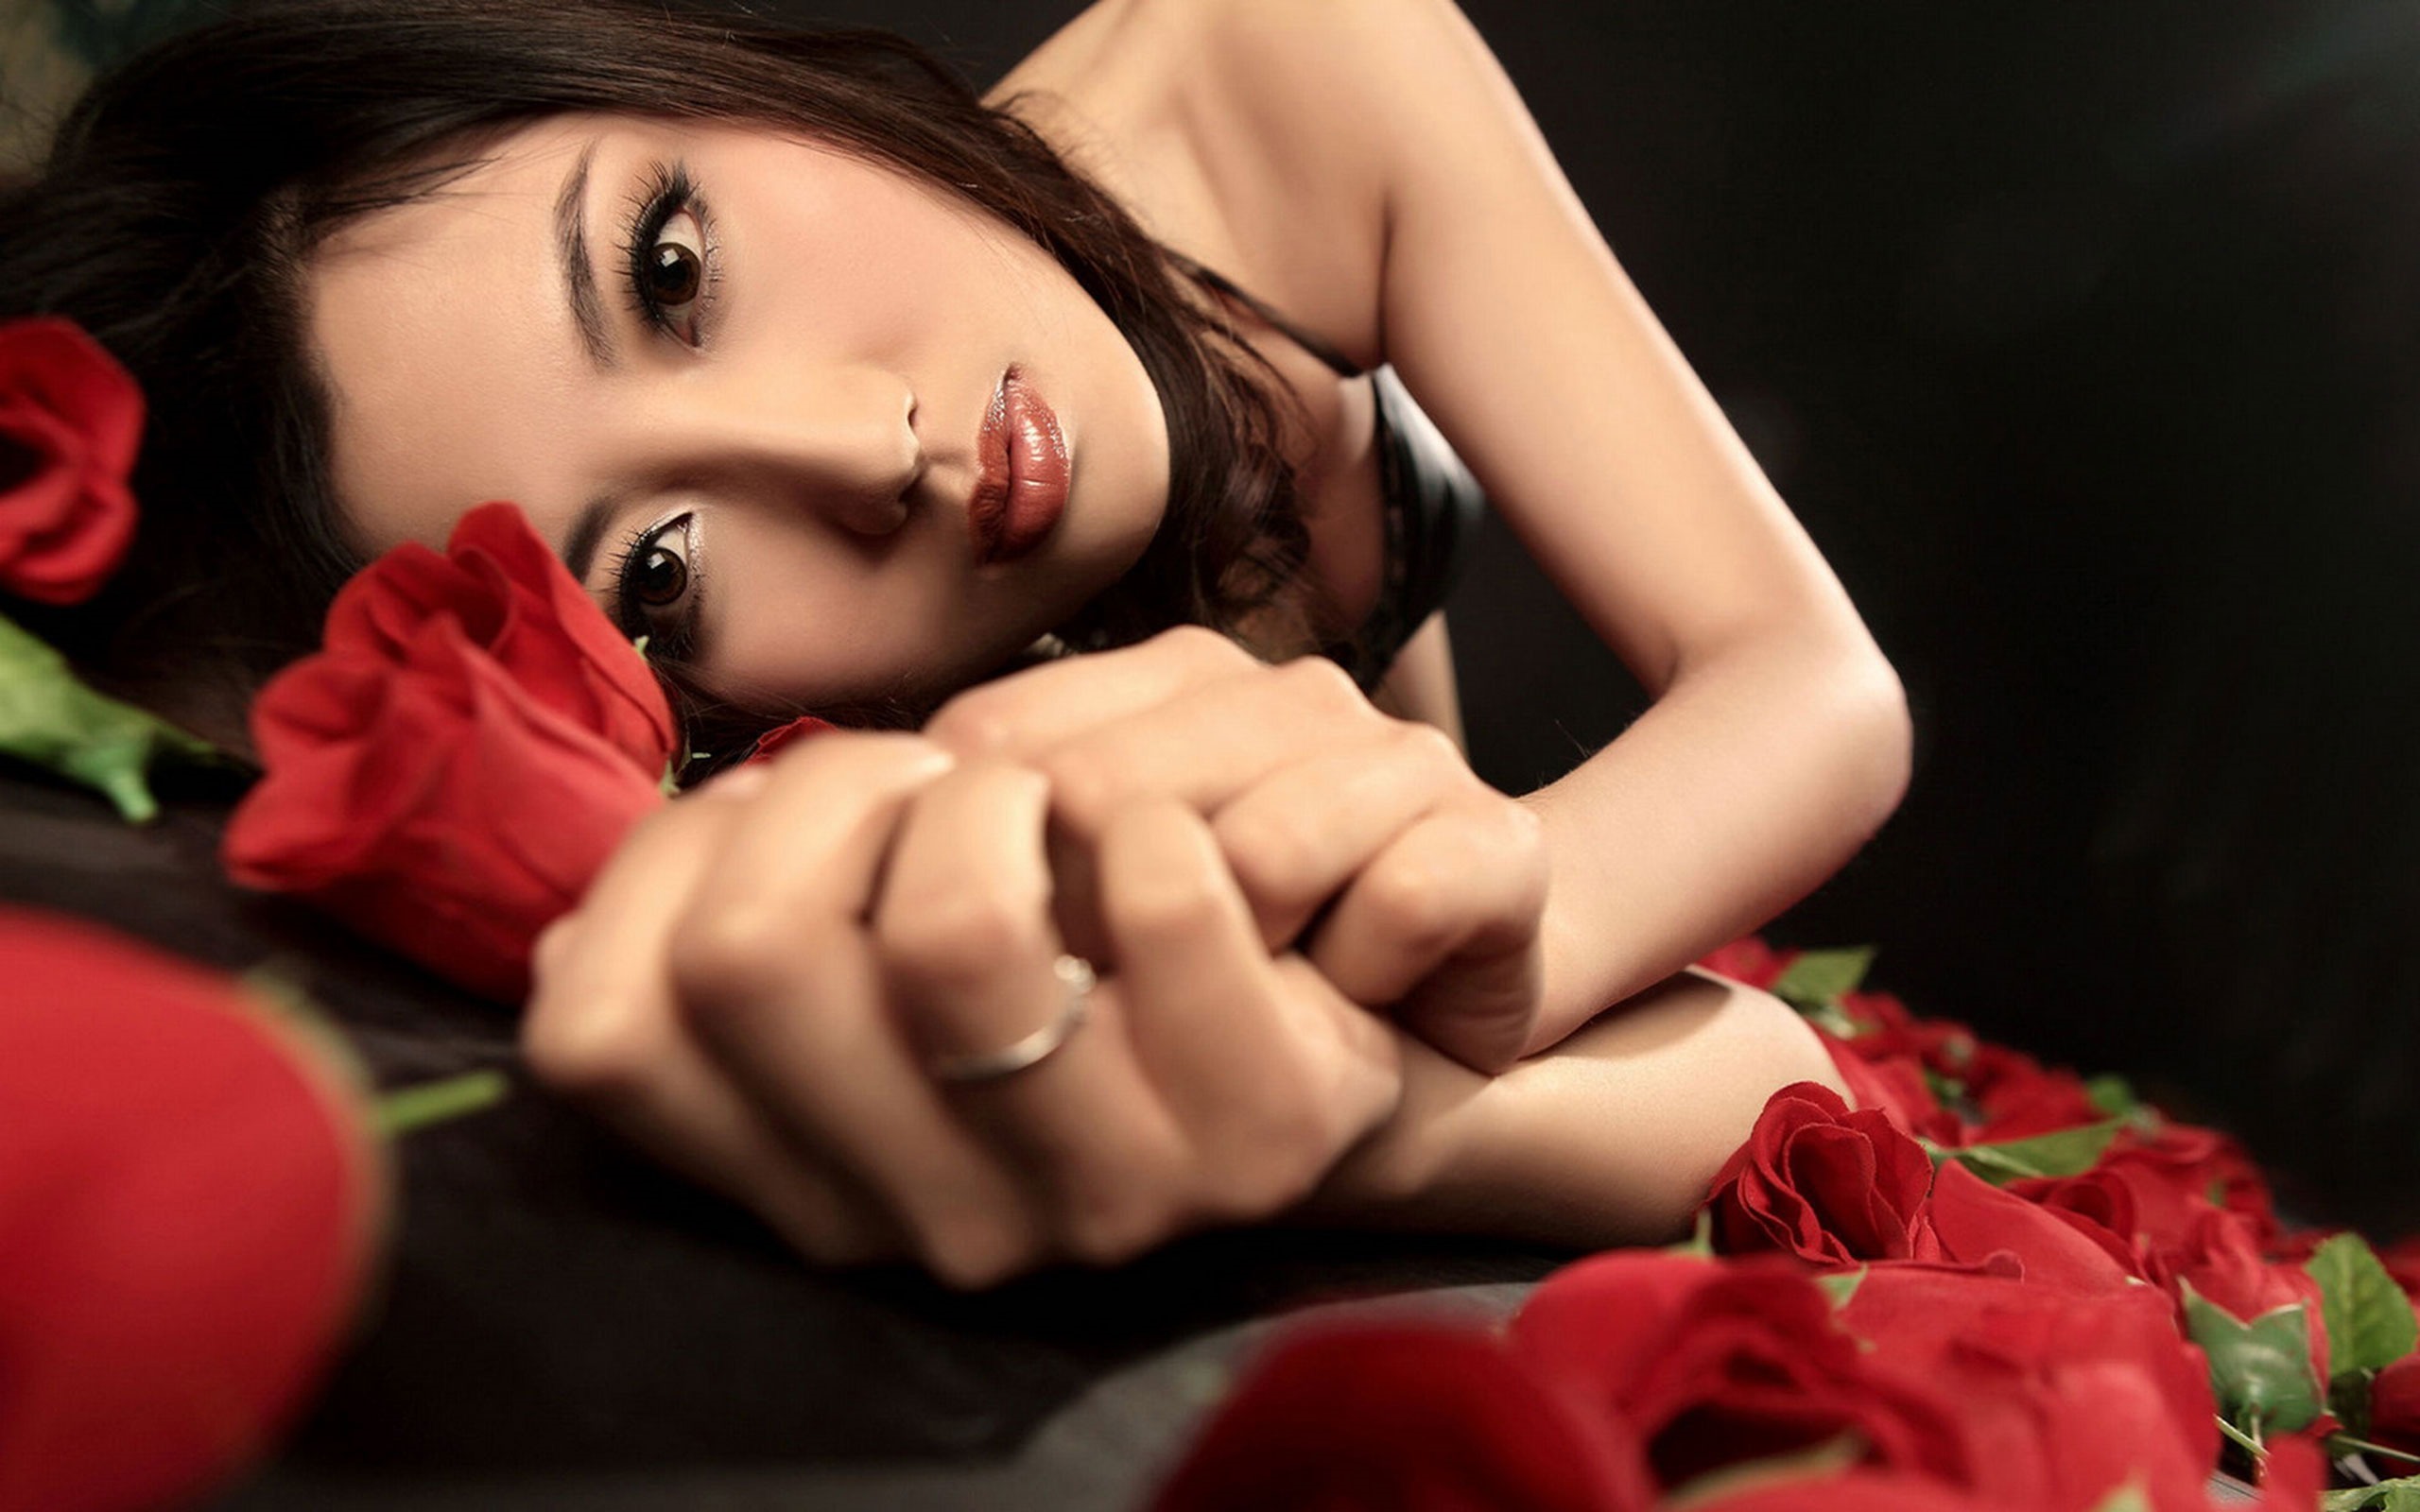 women, asian, close up, face, hair, red rose, ring